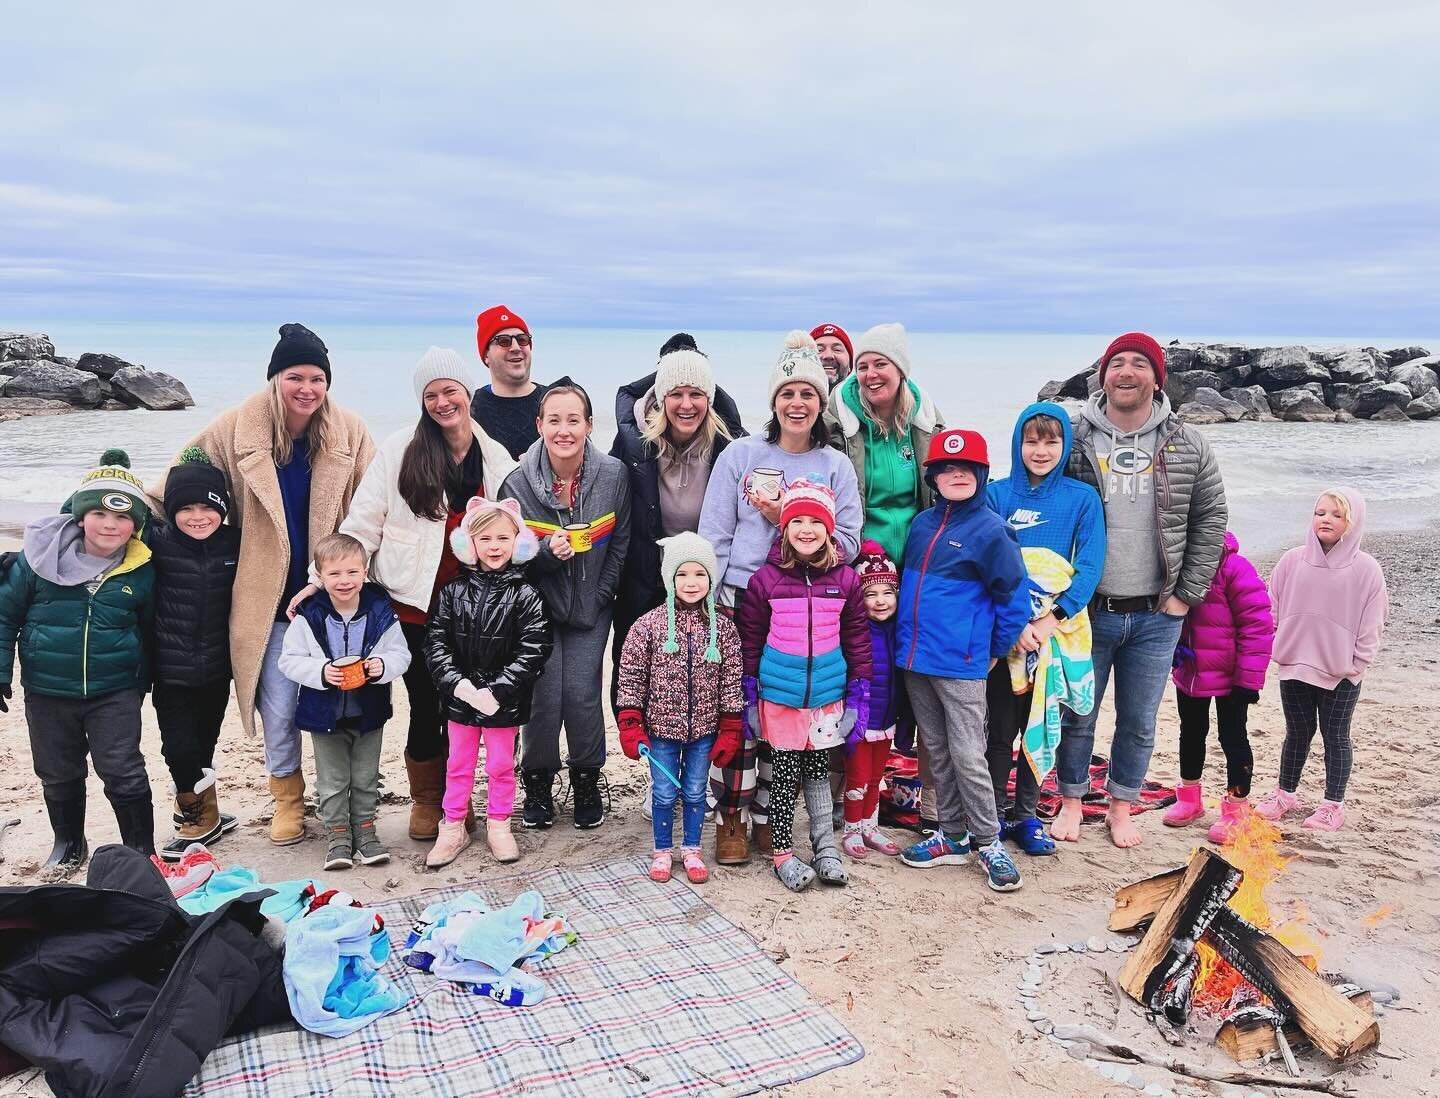 Feeling very invigorated after the first annual Klode Klondike! Thank you for all my wonderful friends for showing up and holding me accountable! 
Props to @curlzbpoppin for staying in the longest and building the fire

#polarplunge #klodeklondike